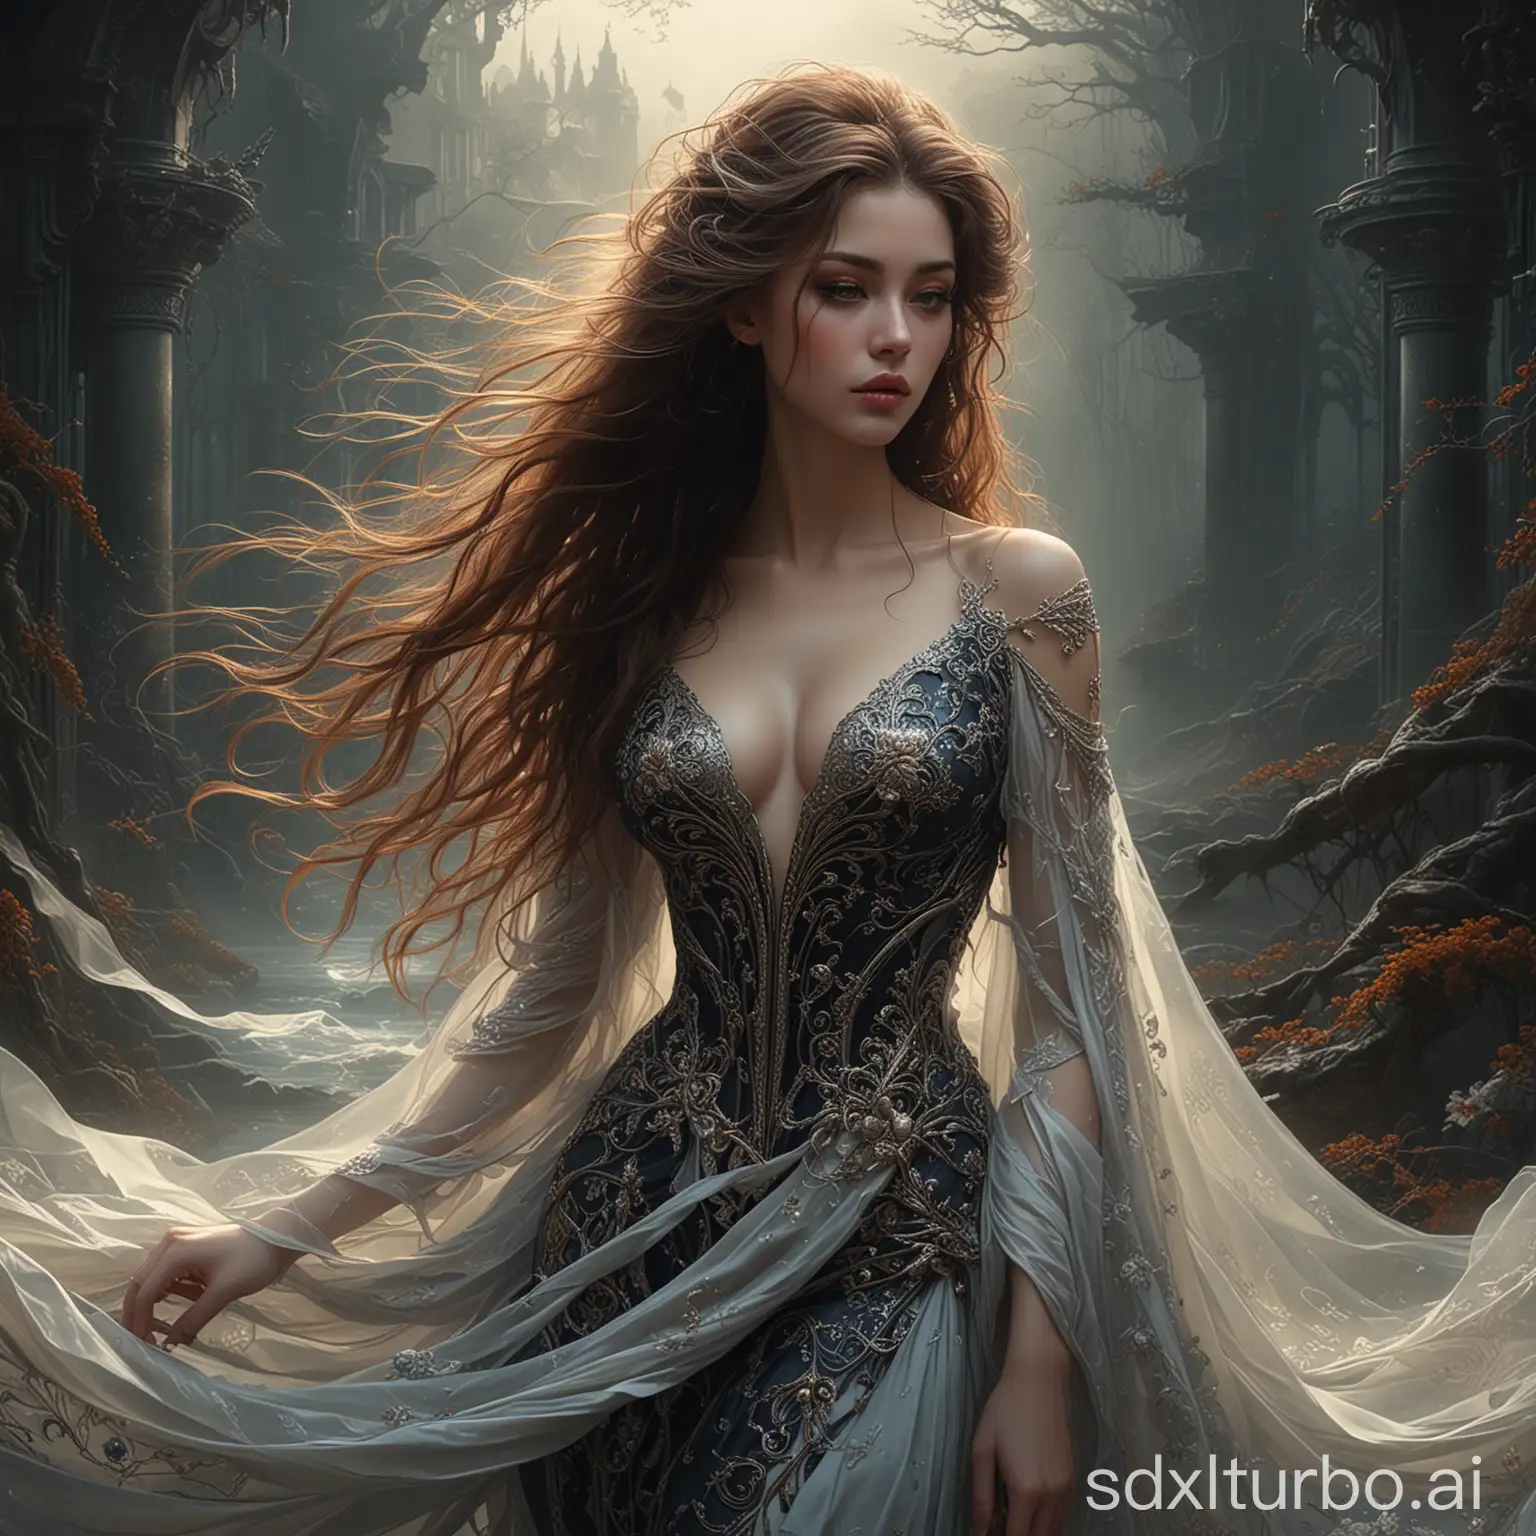 A stunning and sensual digital painting inspired by the artistic style of Karol Bak. The female subject is depicted with long, flowing hair and an exquisite gown, her eyes locked in a mysterious gaze. The background features a dark, fantastical landscape with intricate details and a glossy finish. The artwork showcases the collaboration of Karol Bak and Peter Mohrbacher, Amano, and Karol Bak, and is a perfect embodiment of their combined talents. The piece captures the essence of dark fantasy, conceptual art, and illustration, creating a beautiful and mesmerizing digital masterpiece., painting, illustration, dark fantasy, conceptual art